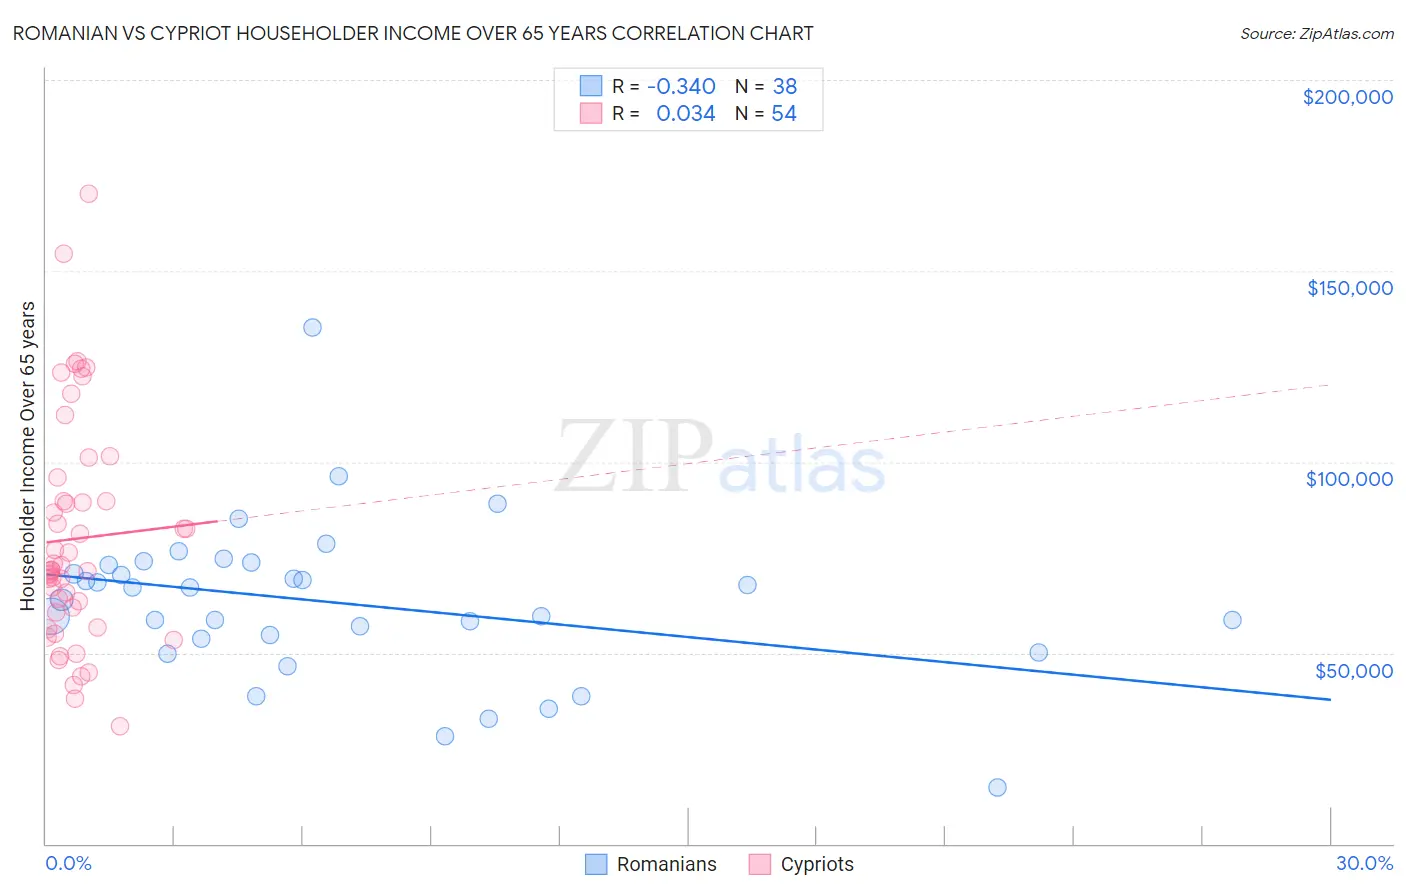 Romanian vs Cypriot Householder Income Over 65 years